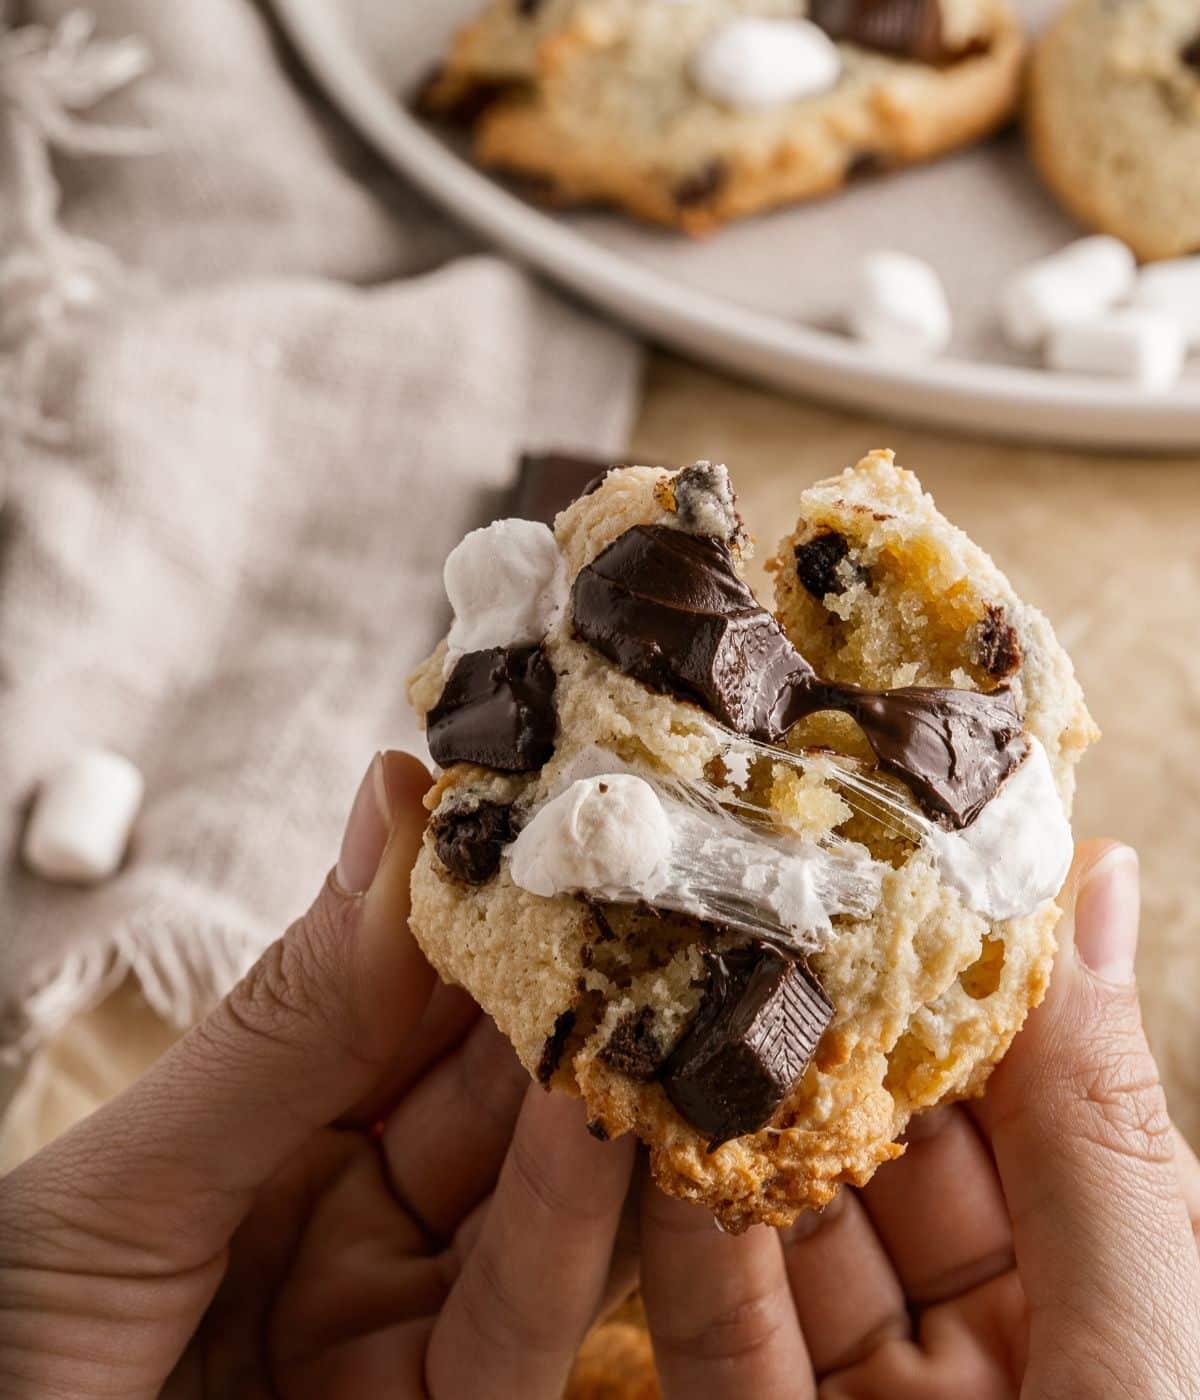 breaking apart chewy marshmallow smores cookie